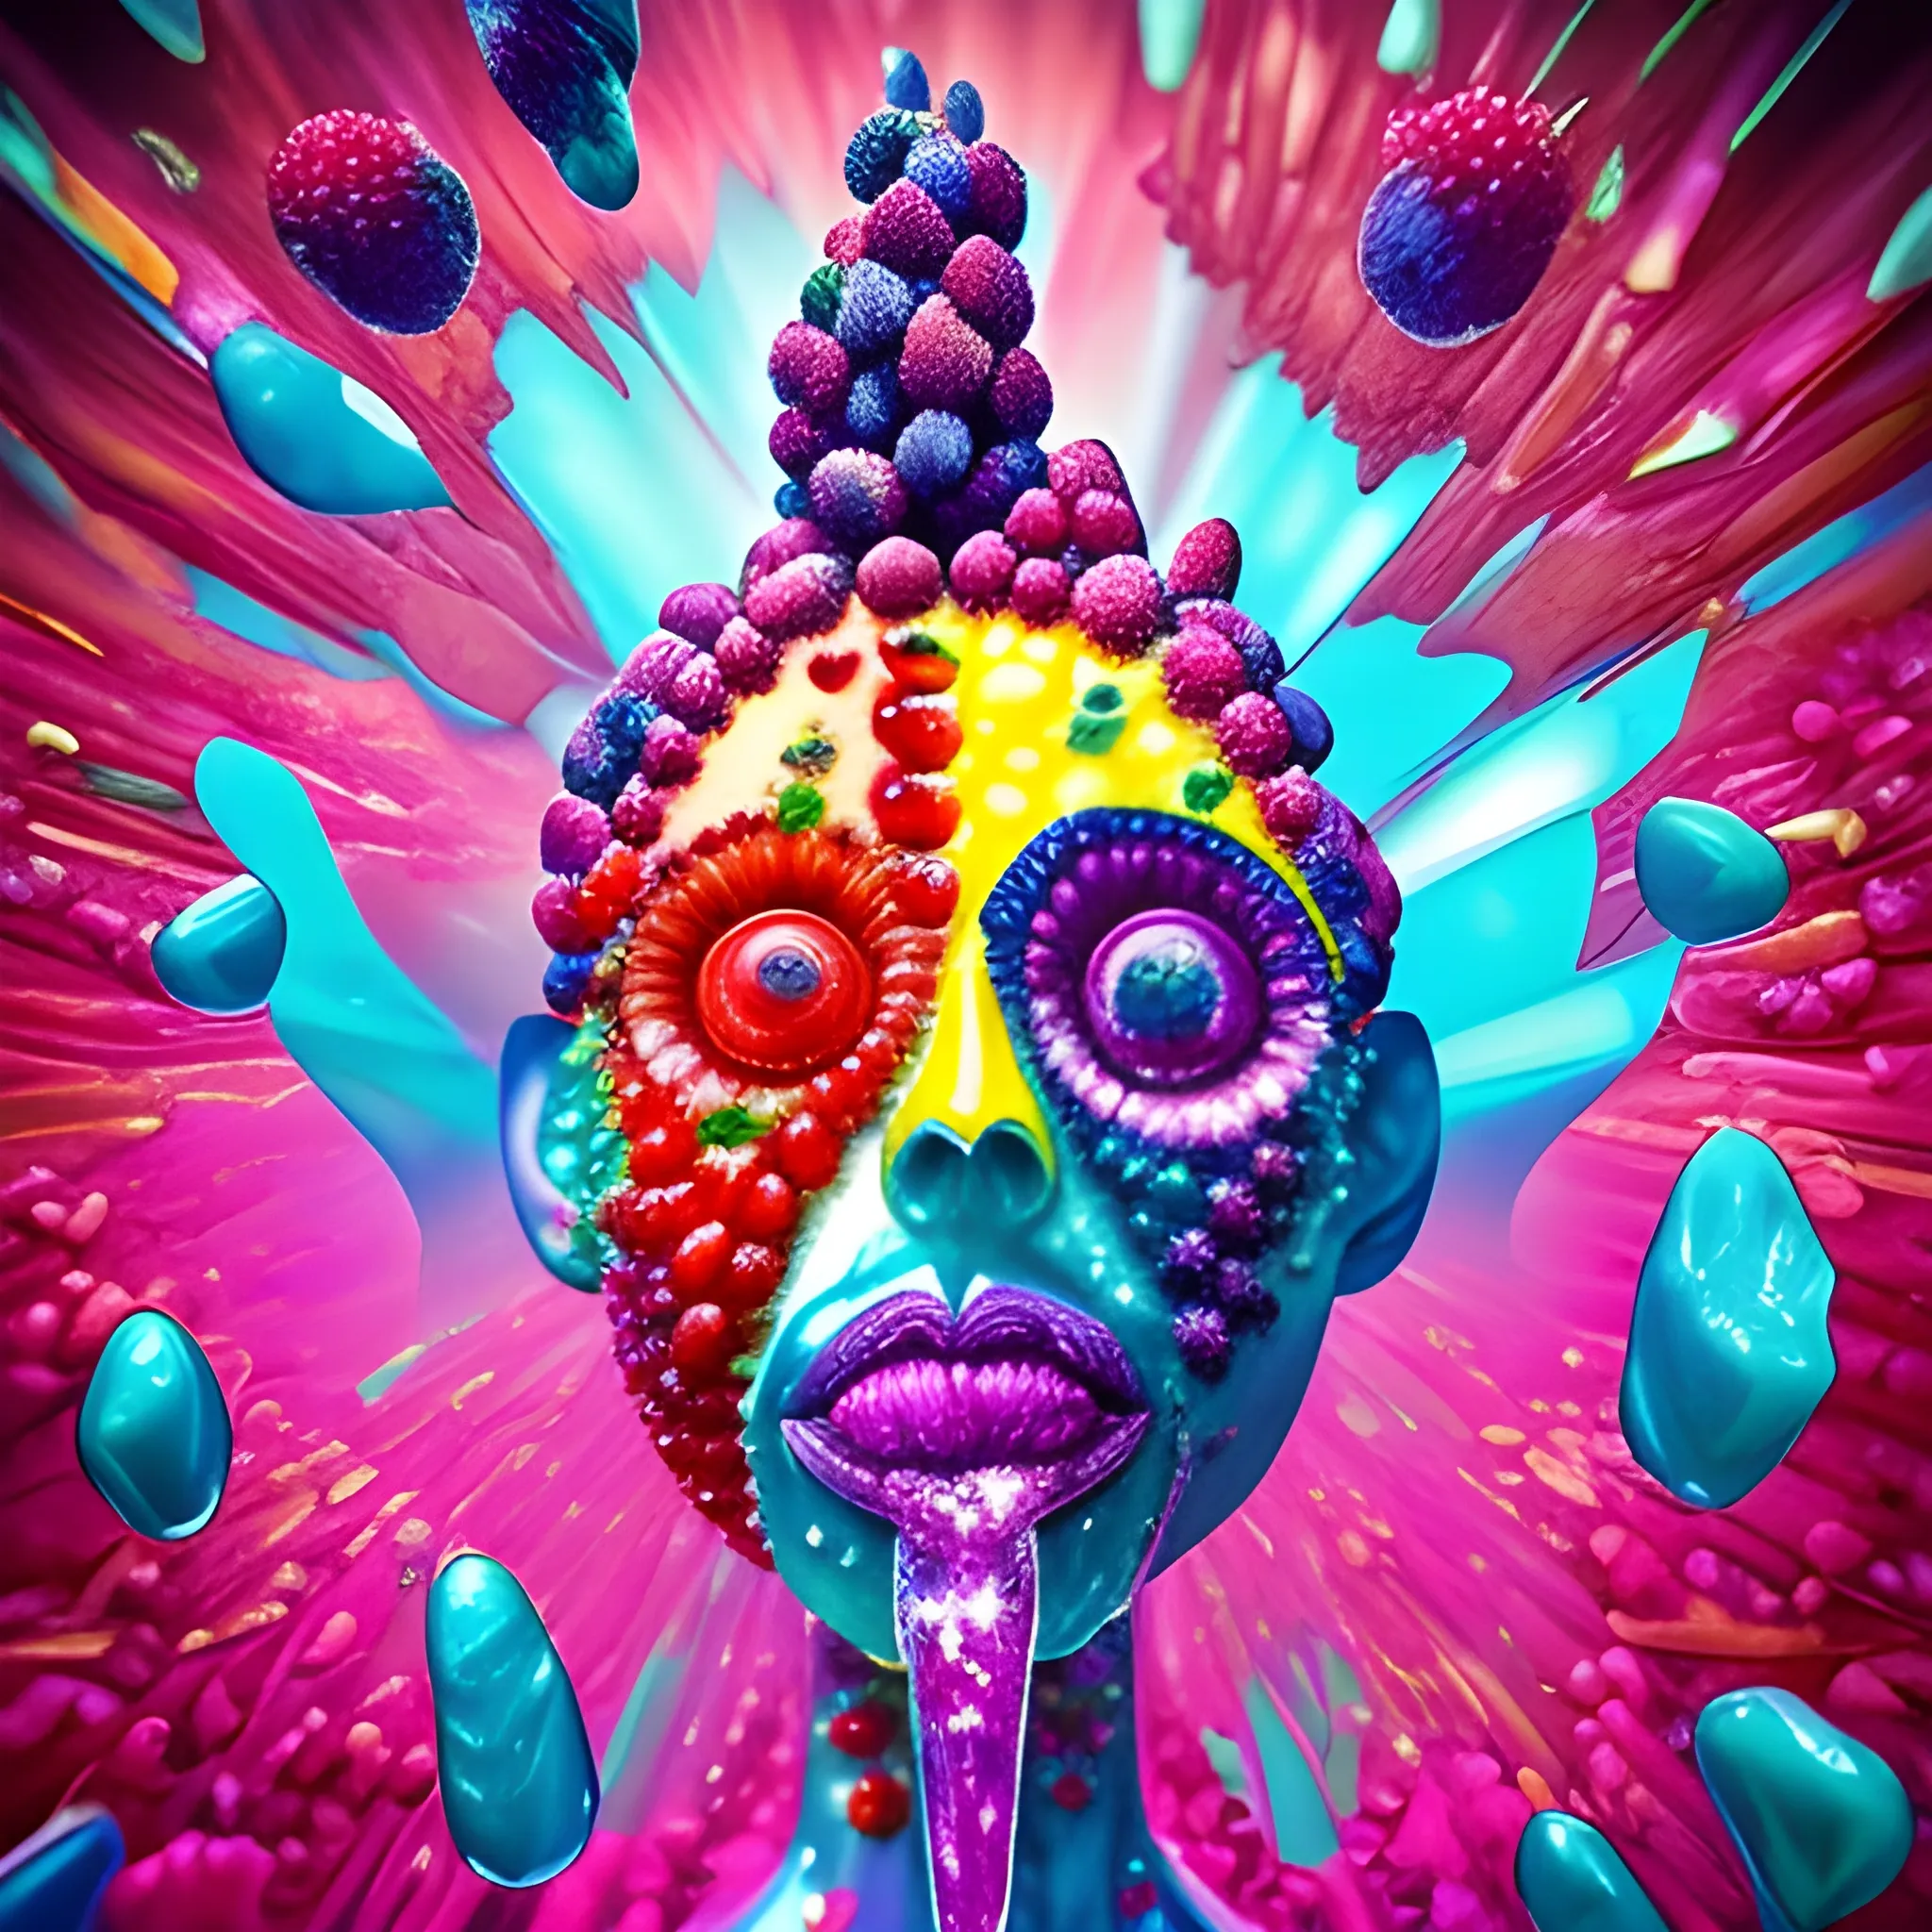 make a crystal sculpture of many crystal crazy maize with human face, crystal blueberries, strawberries, loquats, raspberries around, many ice cubes in the air, saturated colors, surrealism, chaotic background, 3D, Trippy,  eerie atmosphere, close up, Oil Painting, aerial perspective 